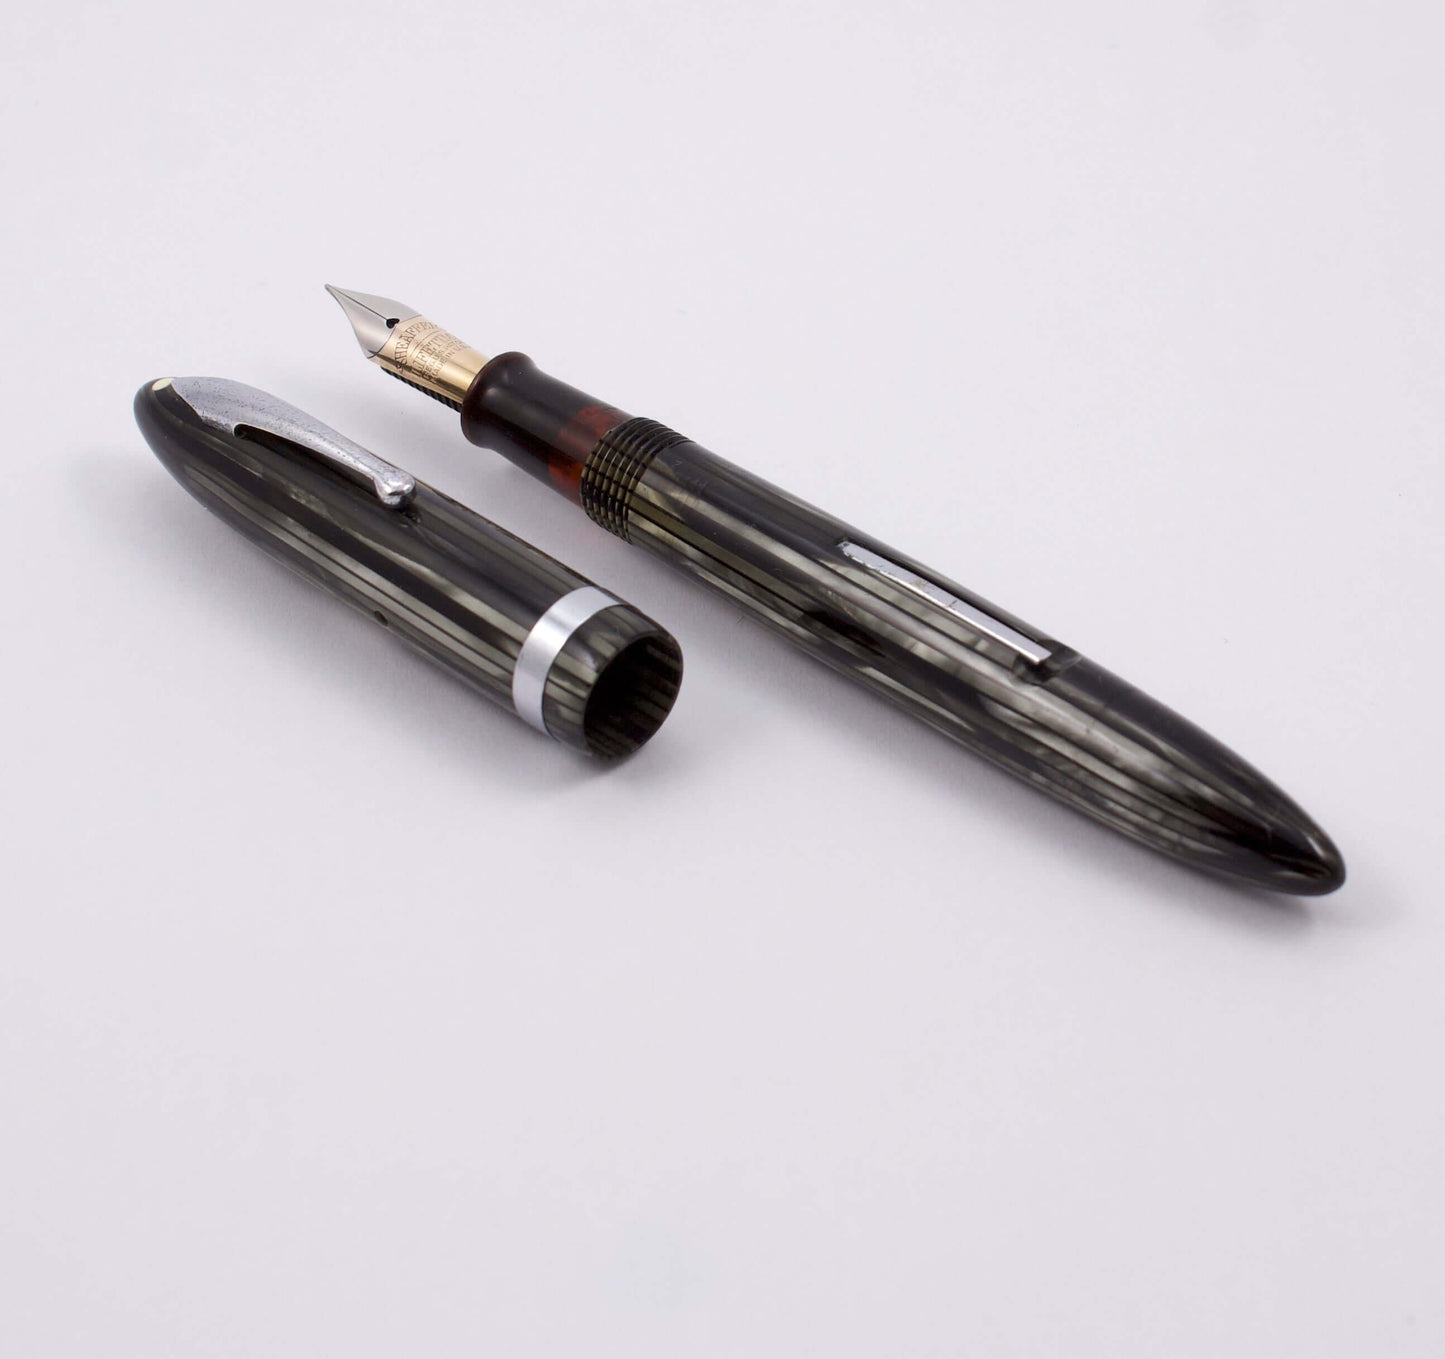 Sheaffer Balance, Short Standard Girth. White Dot. 14K Gold Two-tone Lifetime Nib. Lever Filler, Gray Pearl; Restored Type: Lifetime Sheaffer Balance Manufacturer and Year: 1936 Length: 4 3/4 Filling System: Lever filler with new sac Color/Pattern: Gray P